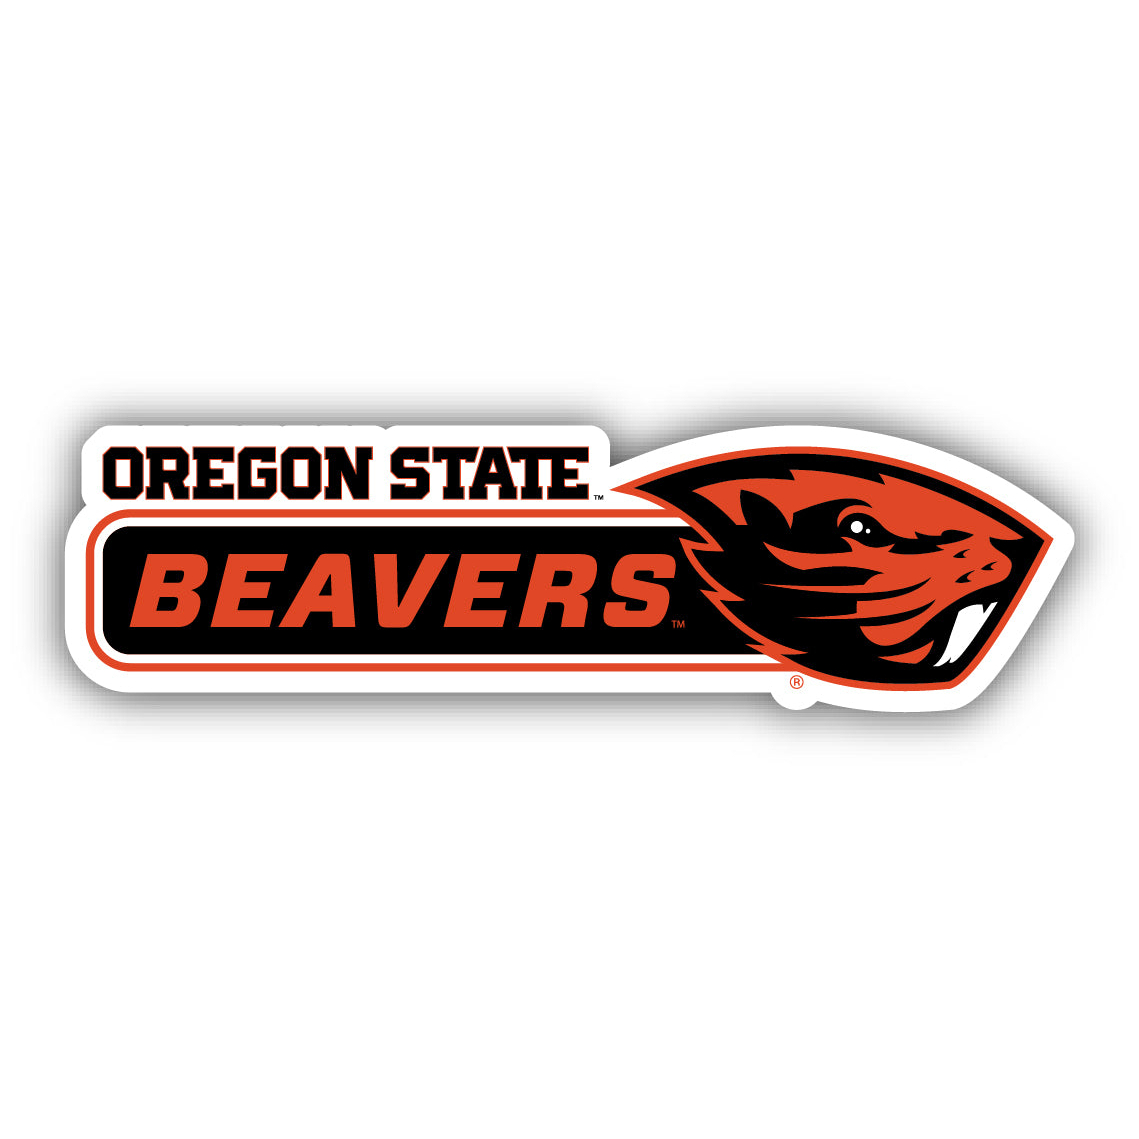 Oregon State Beavers 4 Inch Wide Colorful Vinyl Decal Sticker